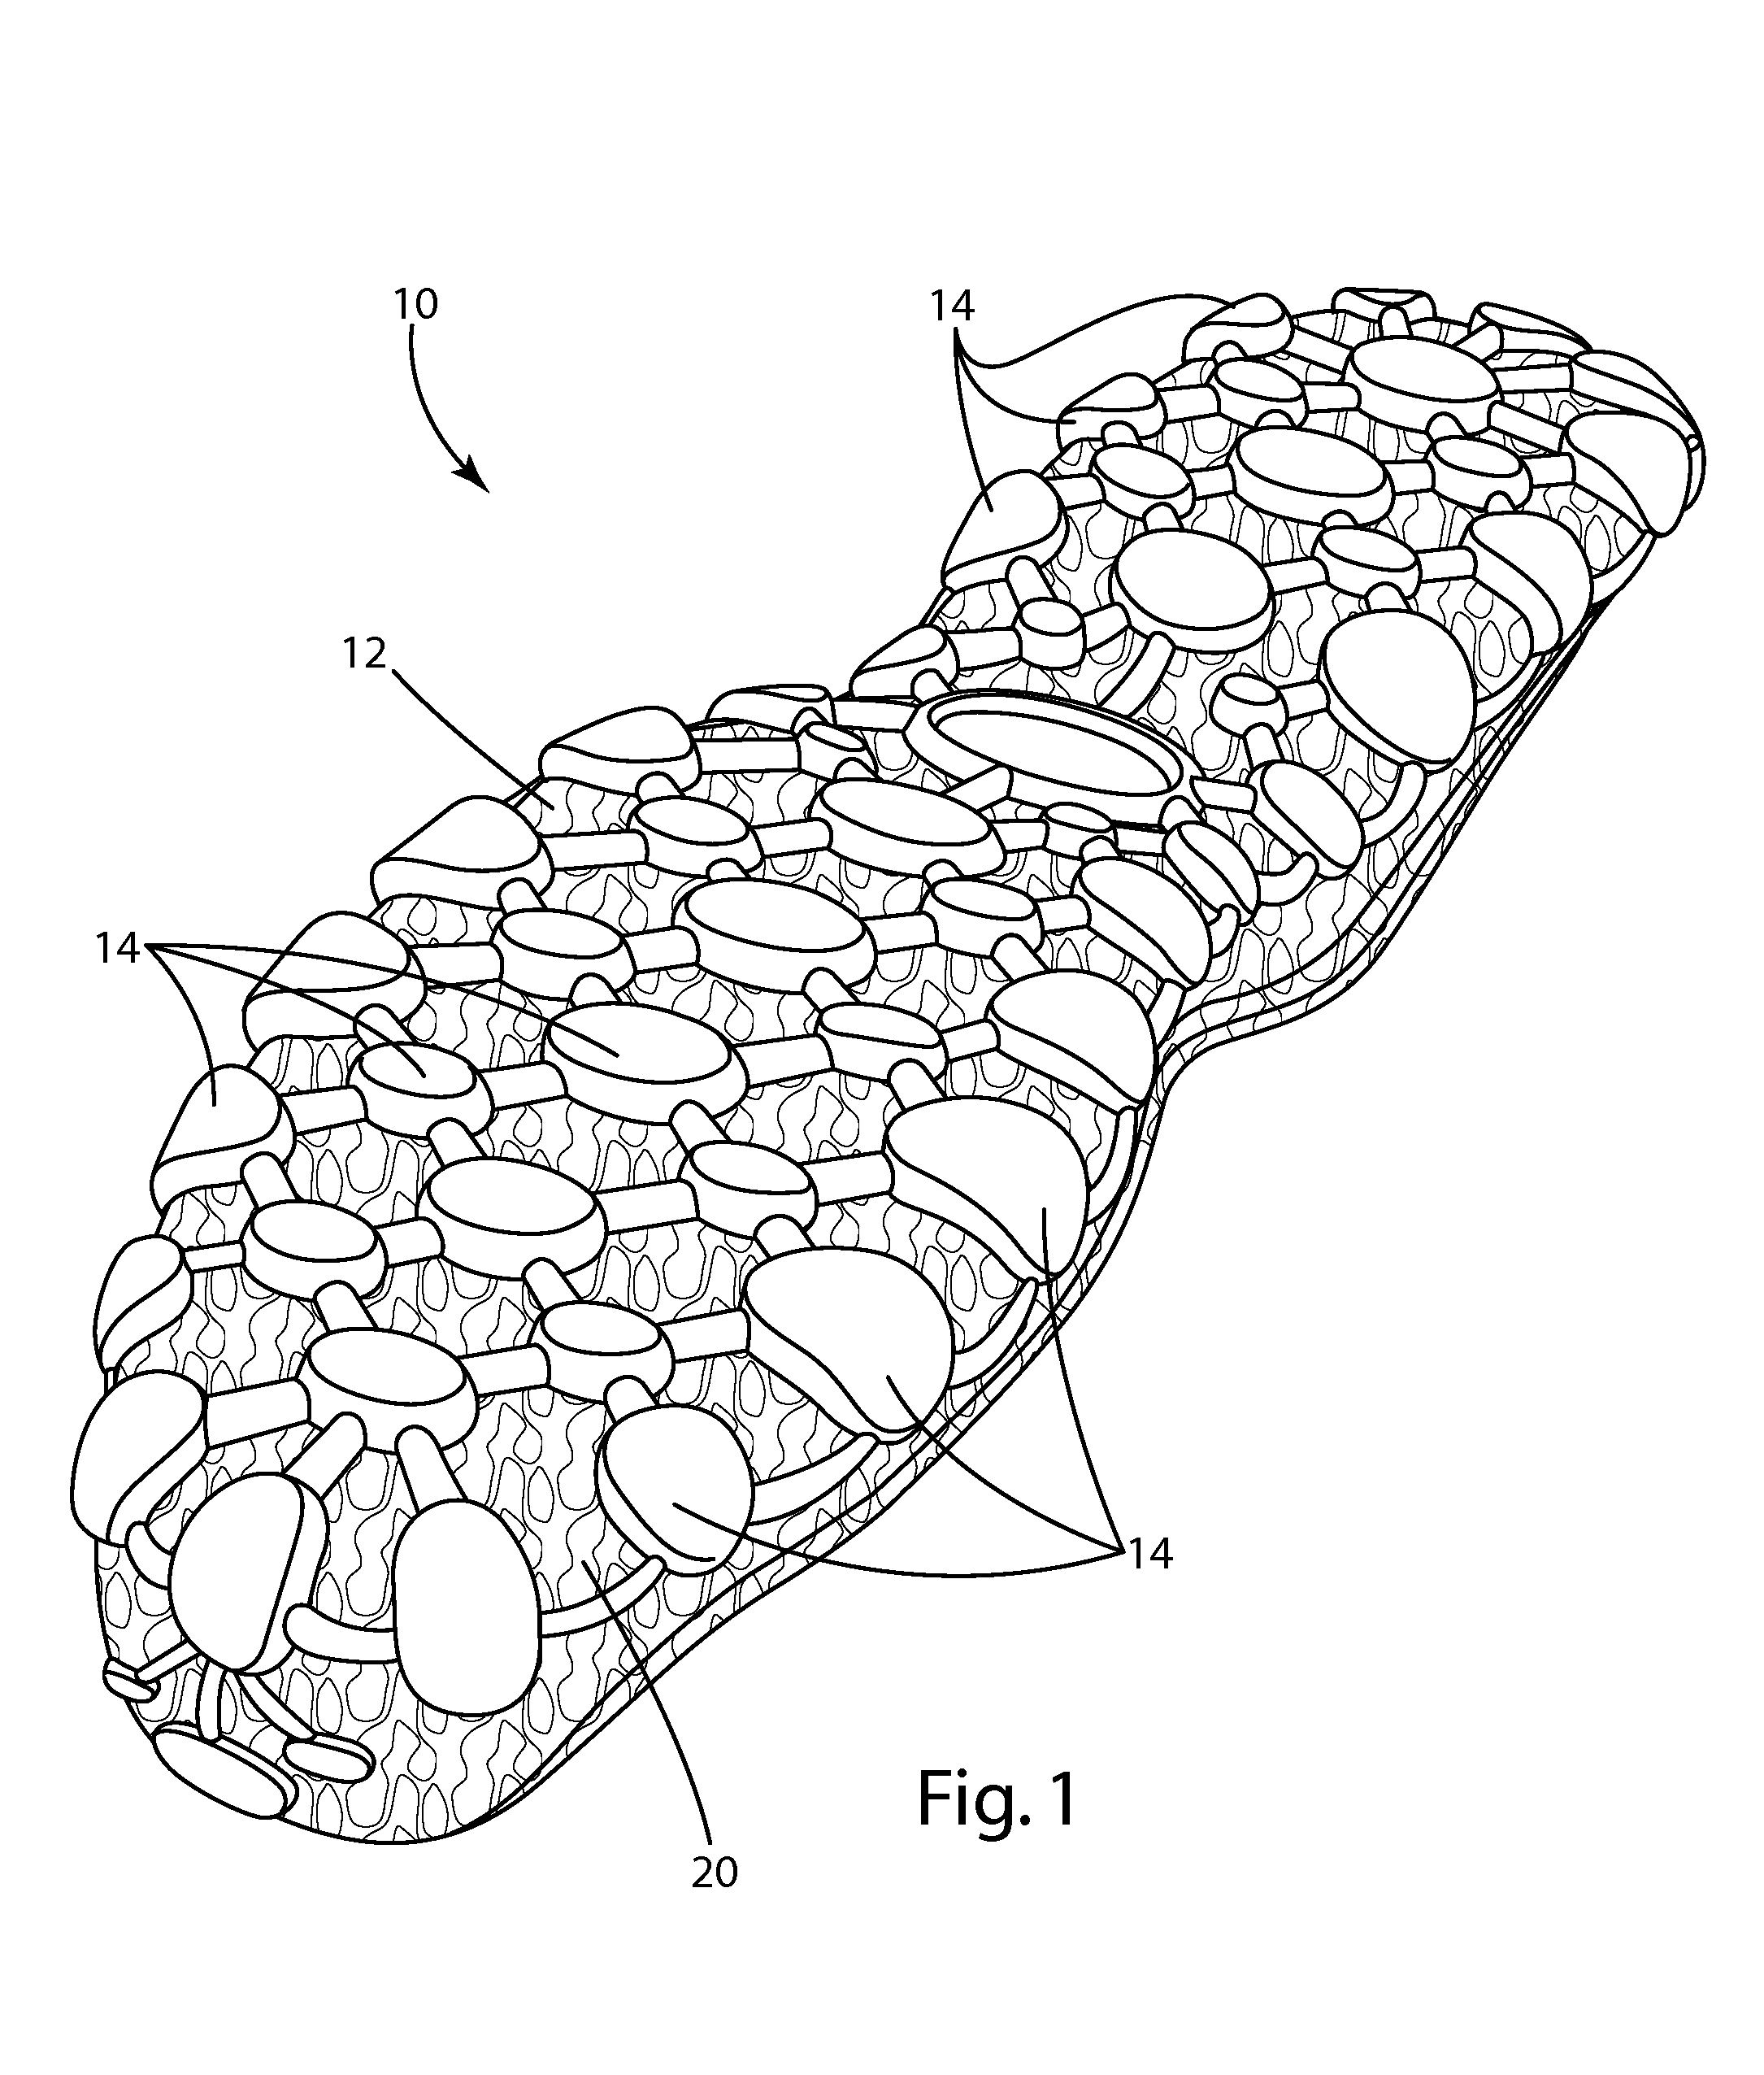 Footwear outsole and method of manufacture